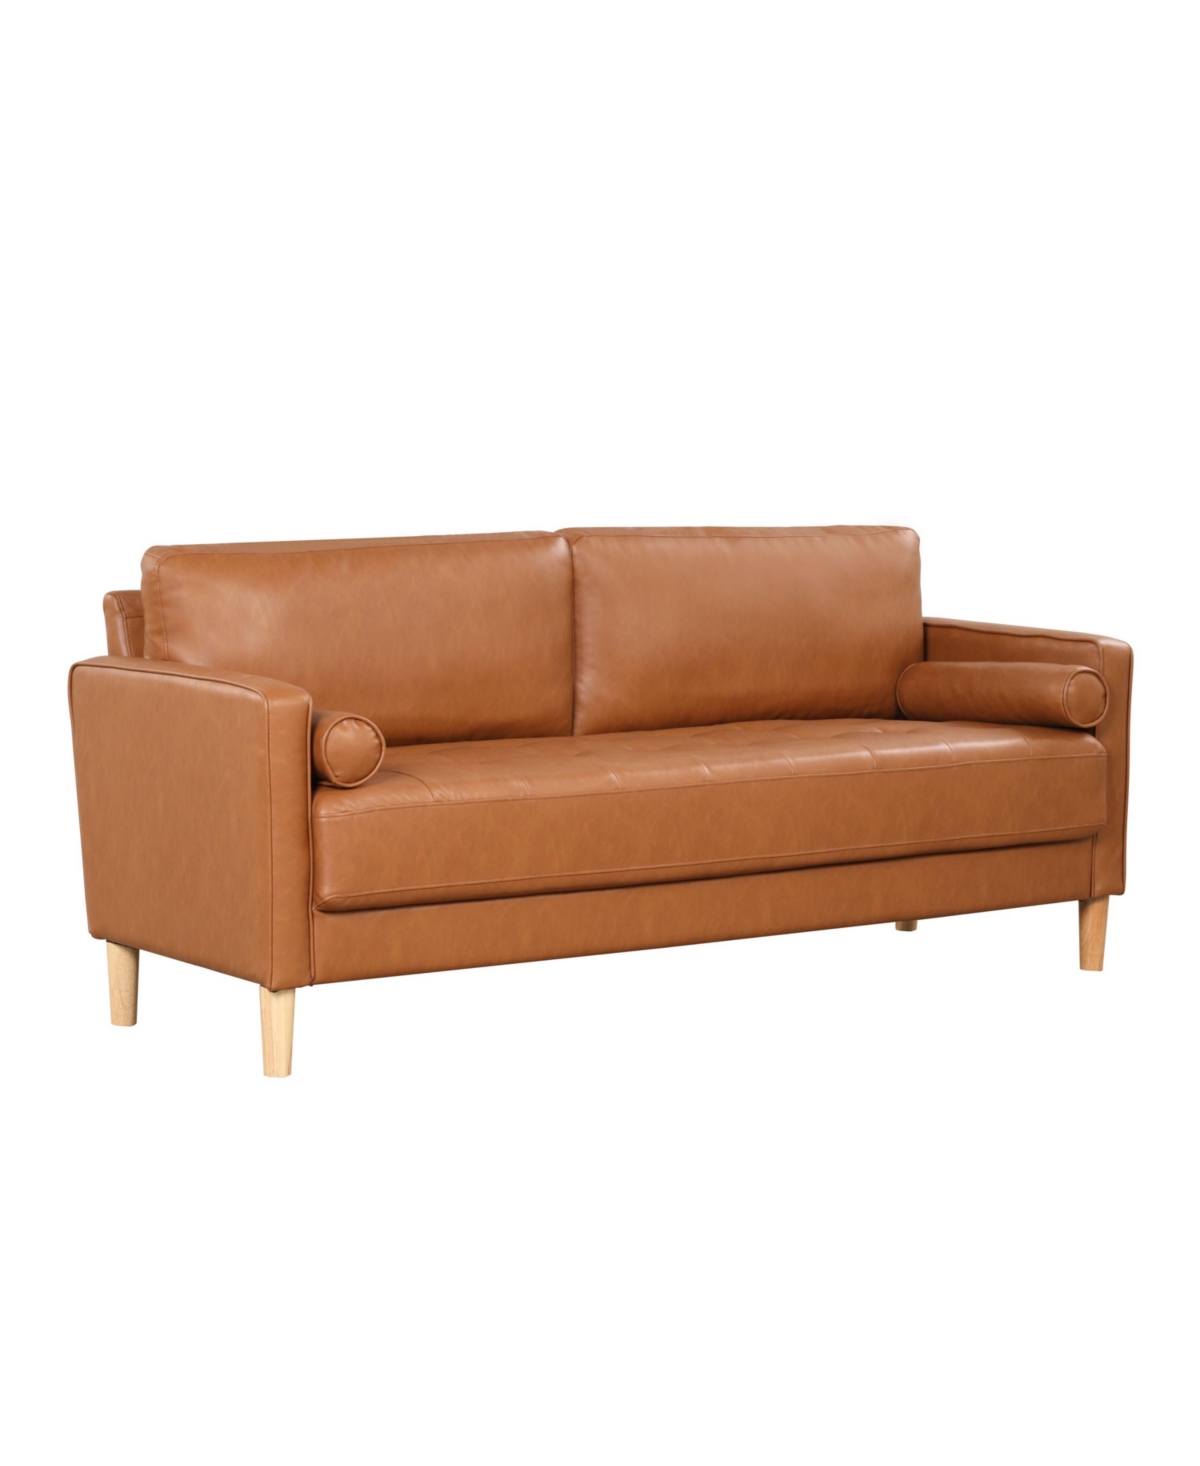 Lifestyle Solutions 76" Faux Leather Morris Sofa In Caramel